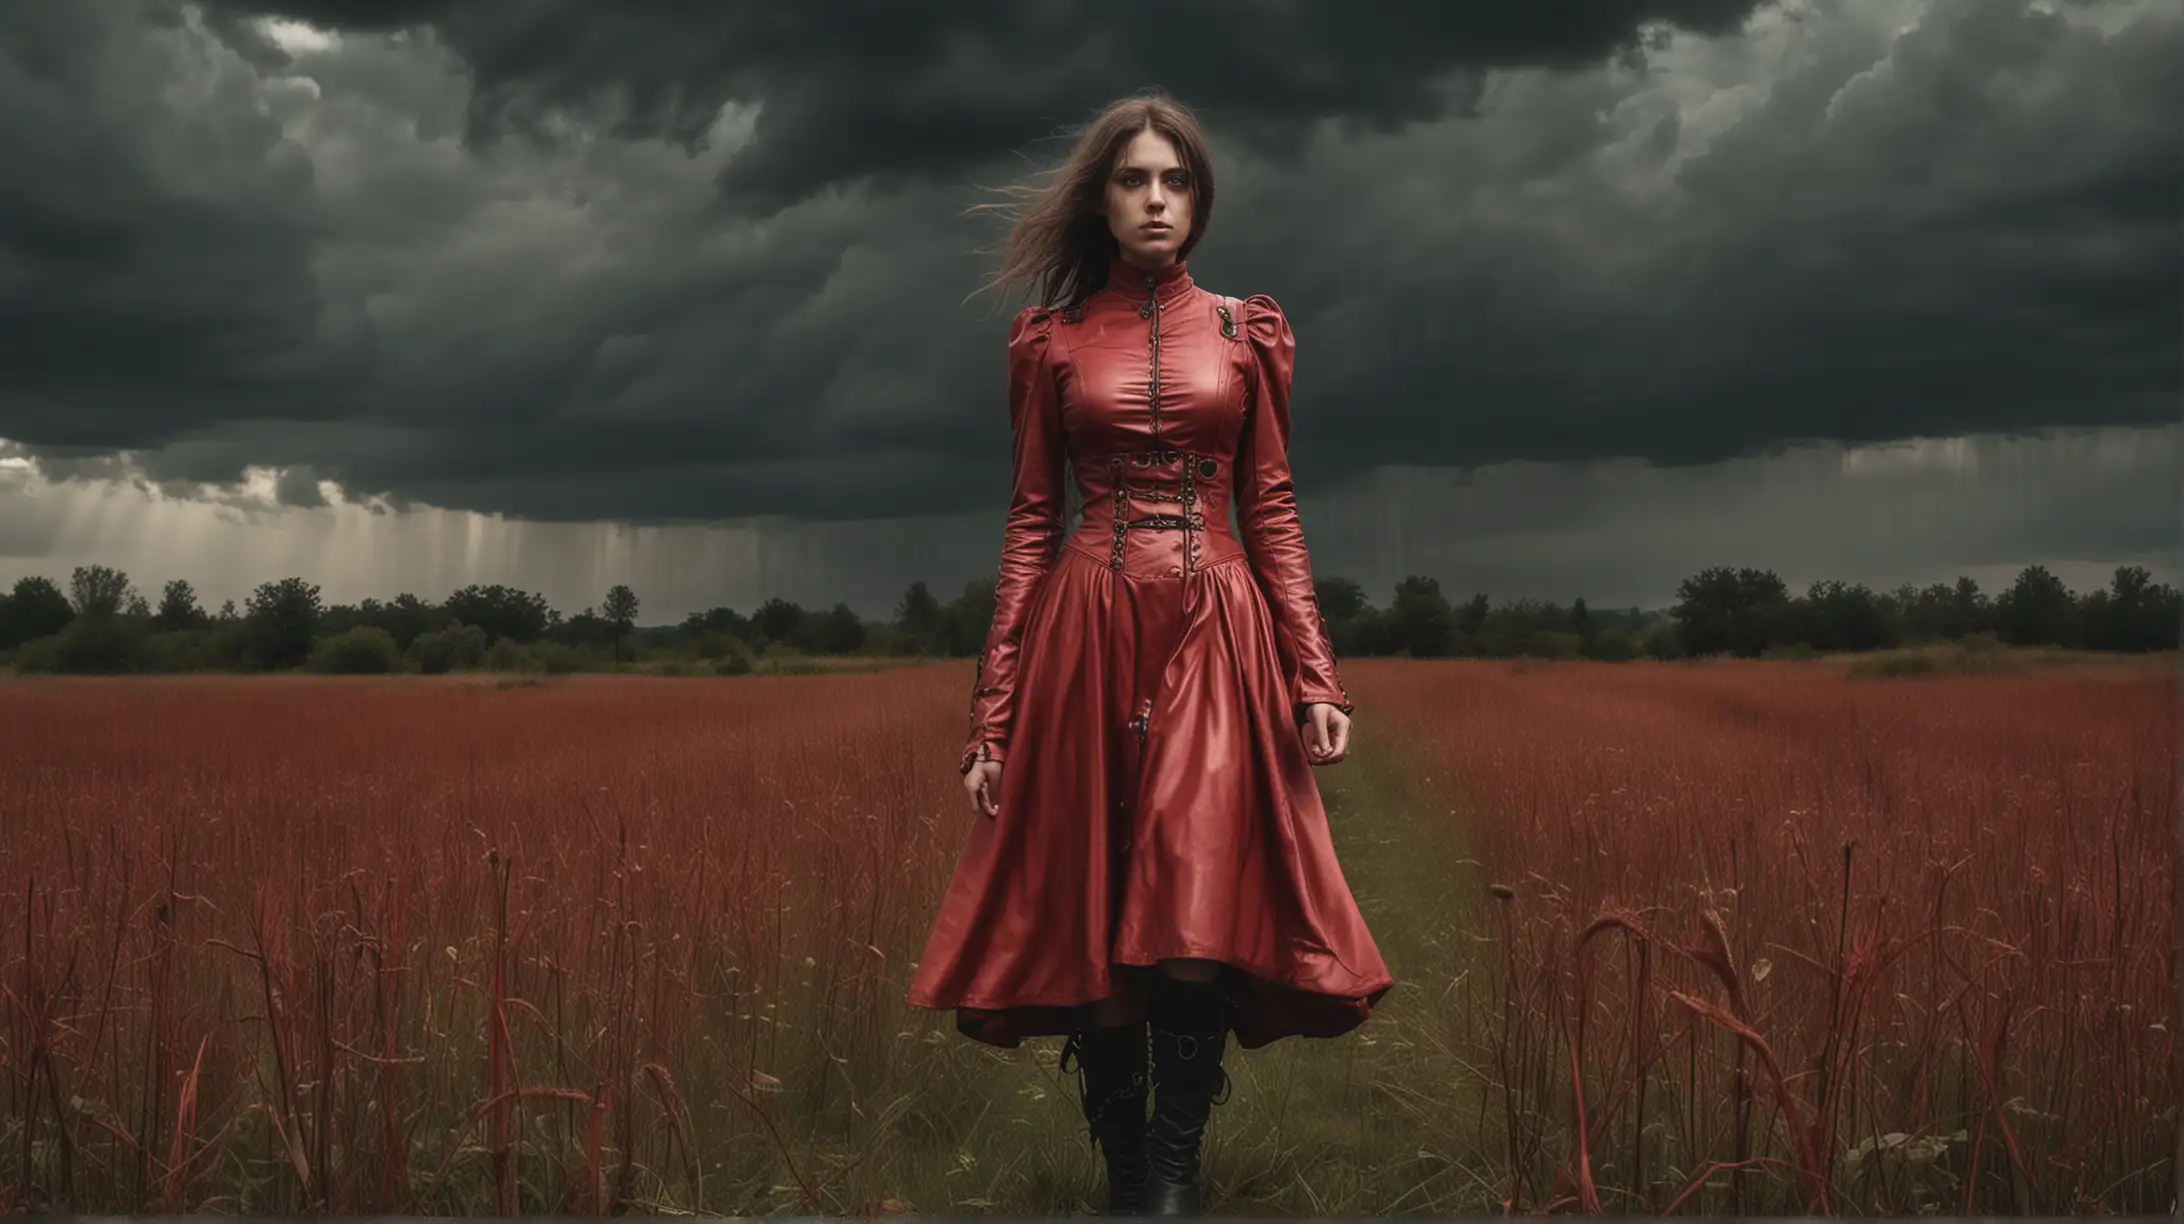 Lonely Steampunk Woman in Red Leather Dress in Dark Psychedelic Field